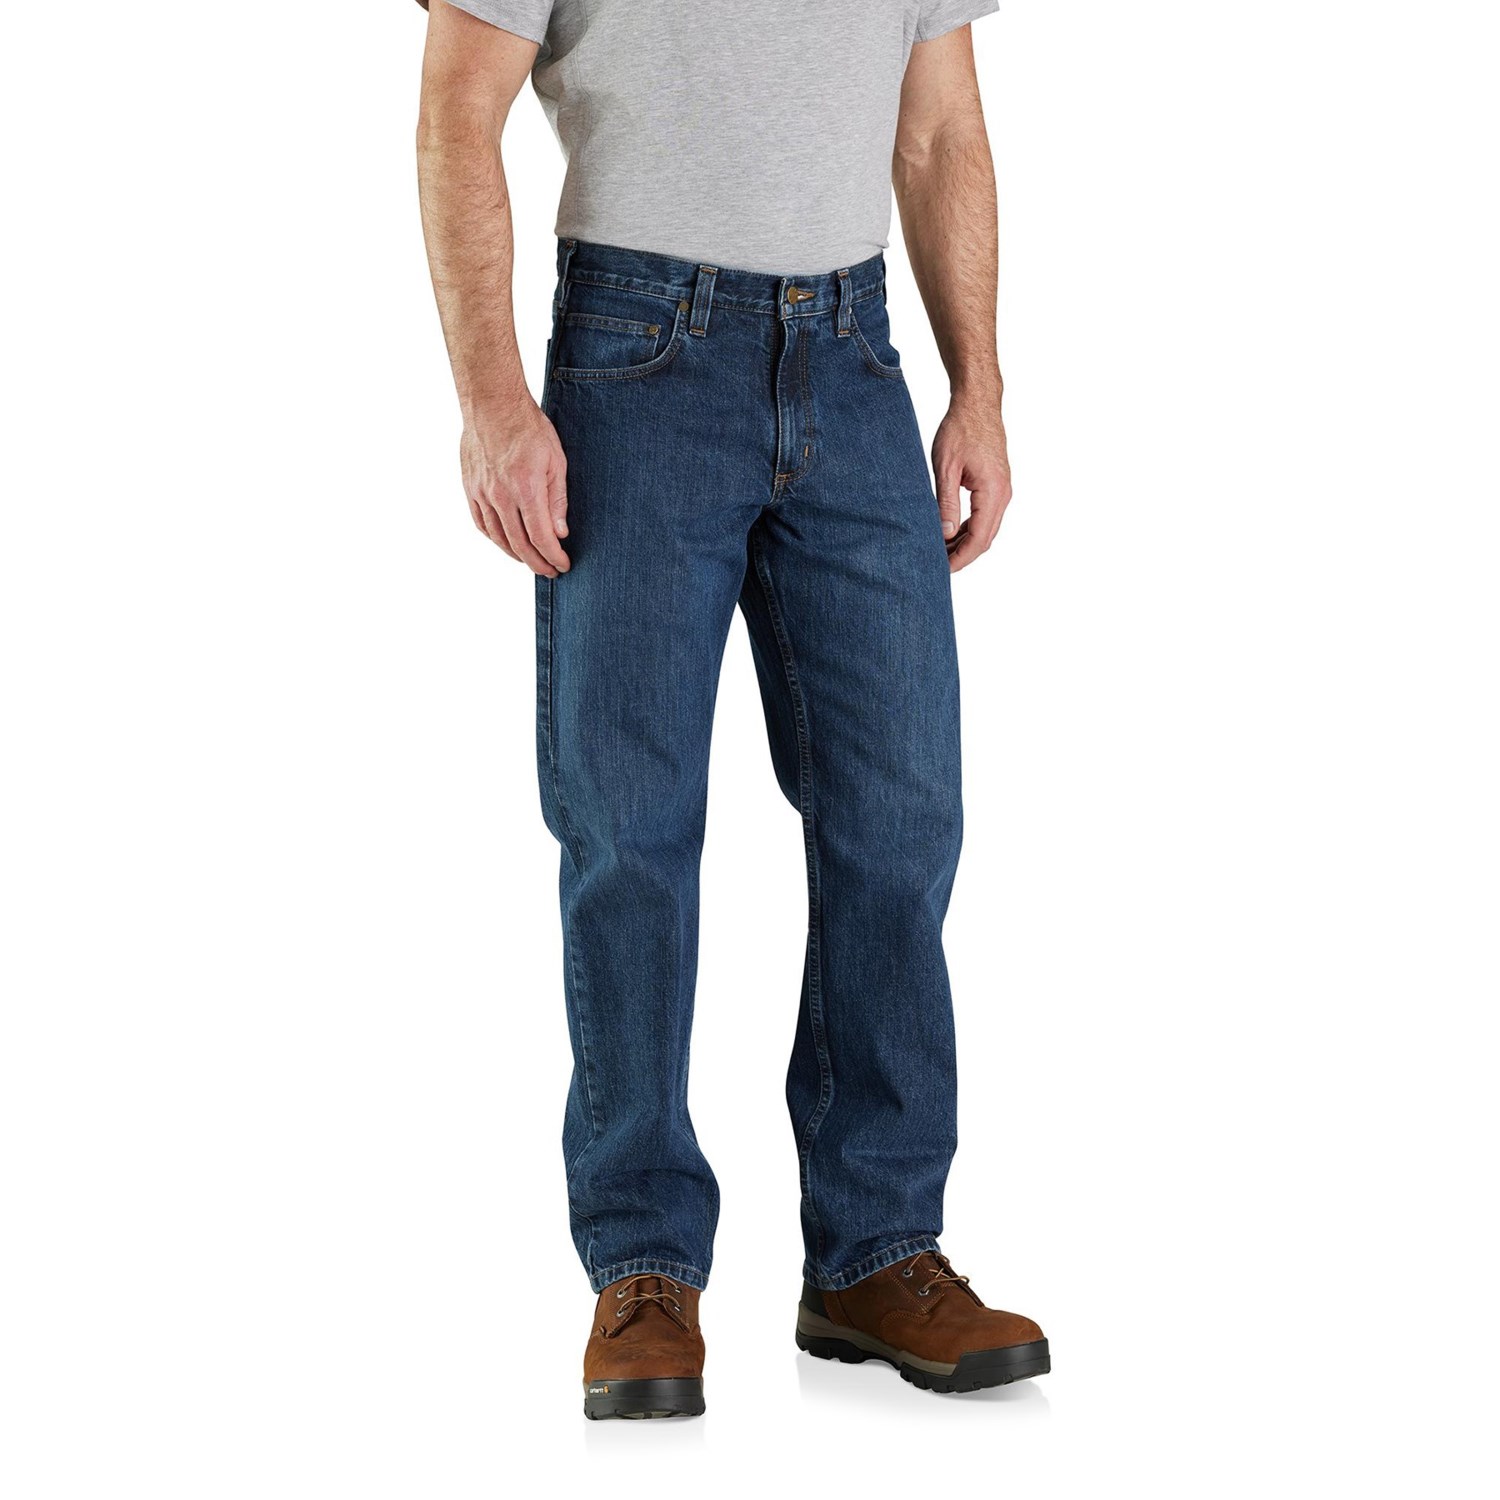 Carhartt 105119 Relaxed Fit 5-Pocket Jeans - Factory Seconds